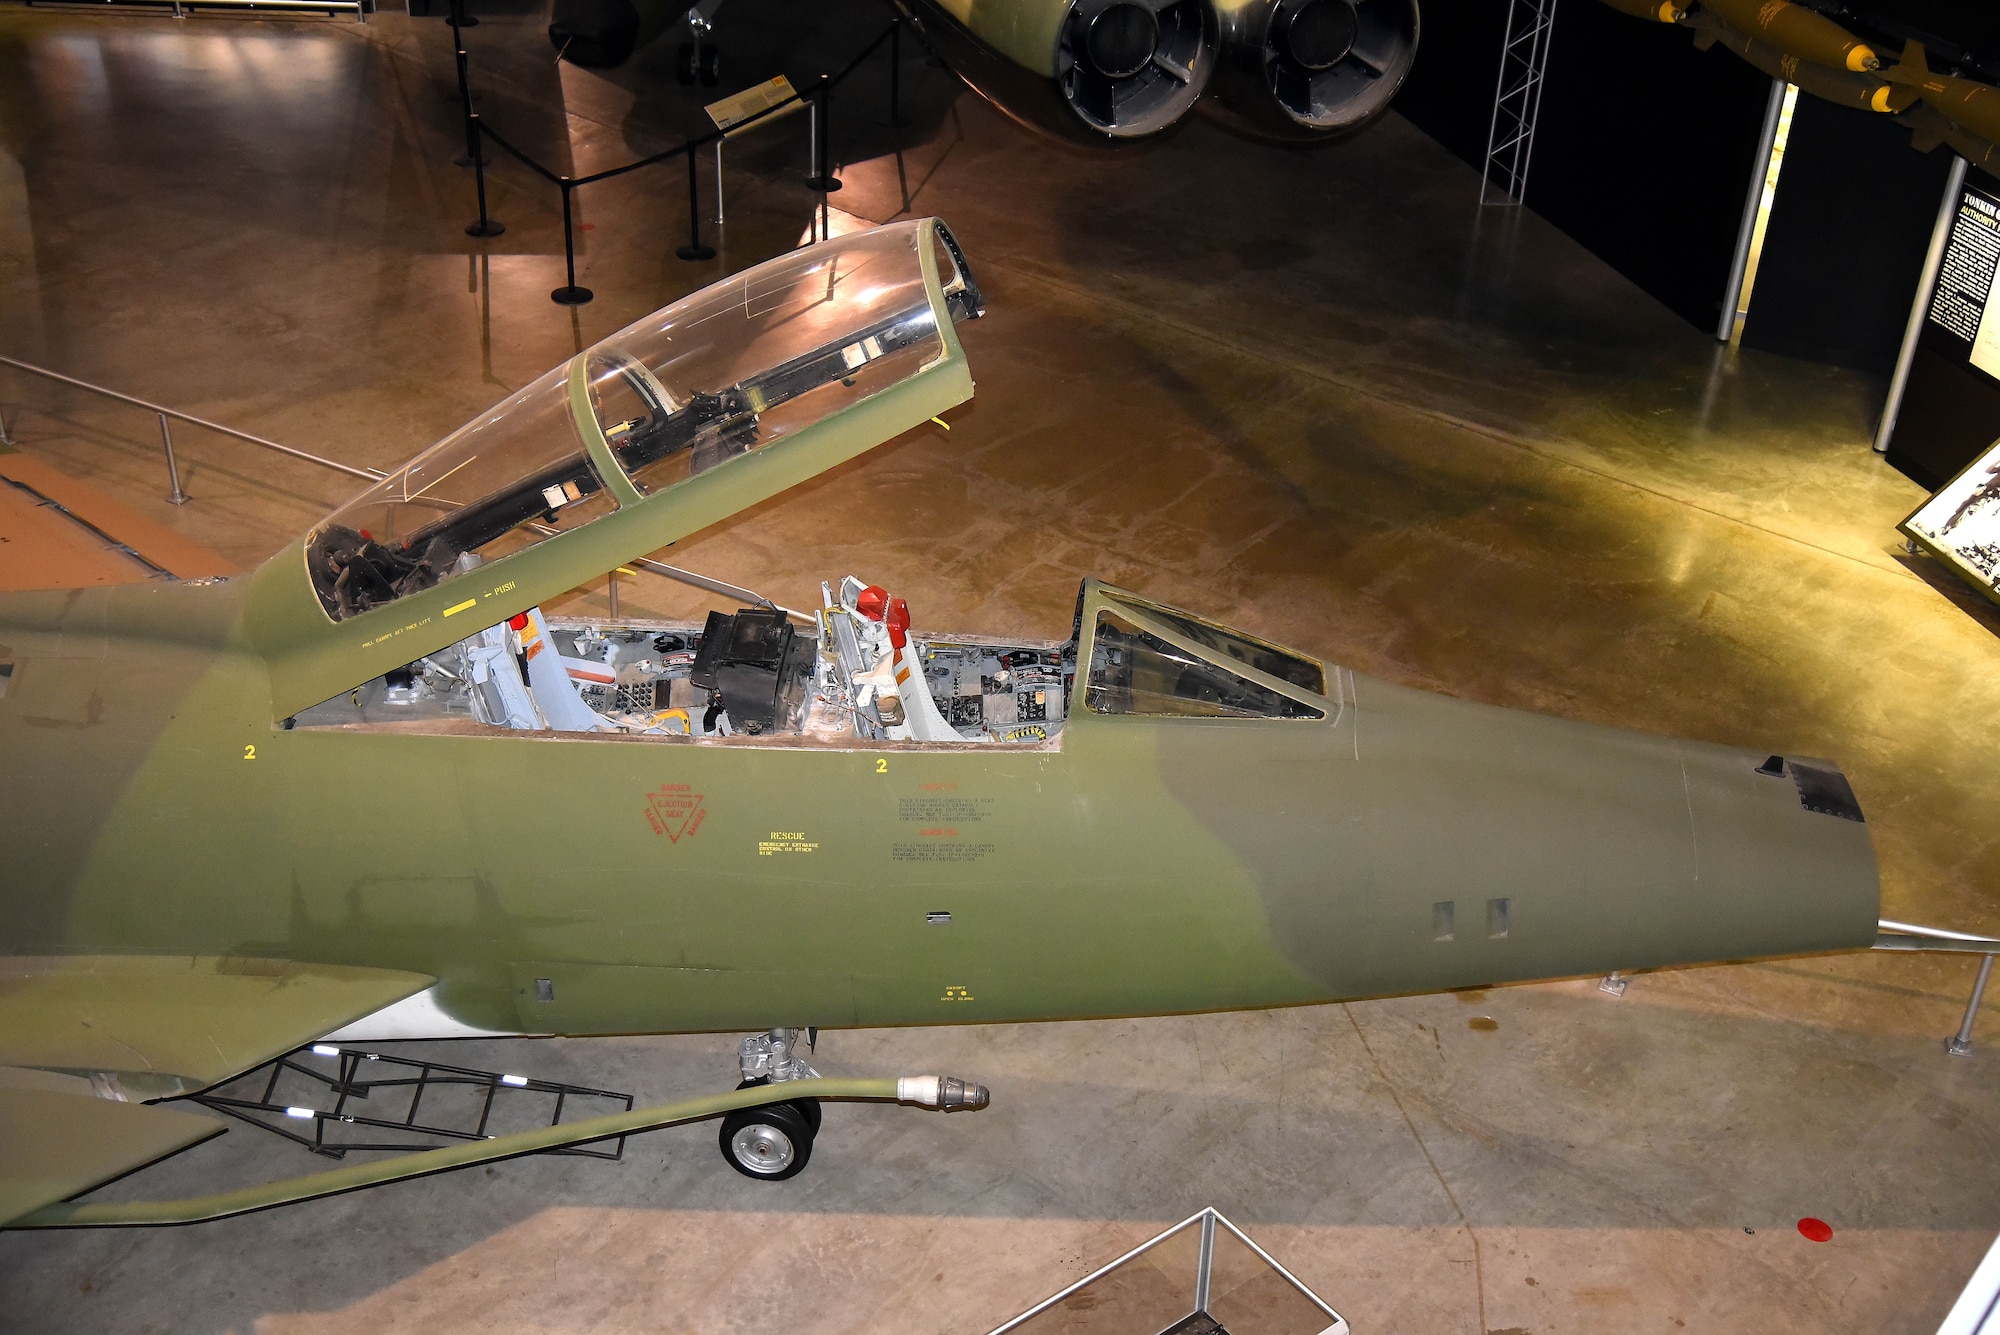 DAYTON, Ohio -- North American F-100F in the Southeast Asia War Gallery at the National Museum of the United States Air Force. (U.S. Air Force photo by Ken LaRock)